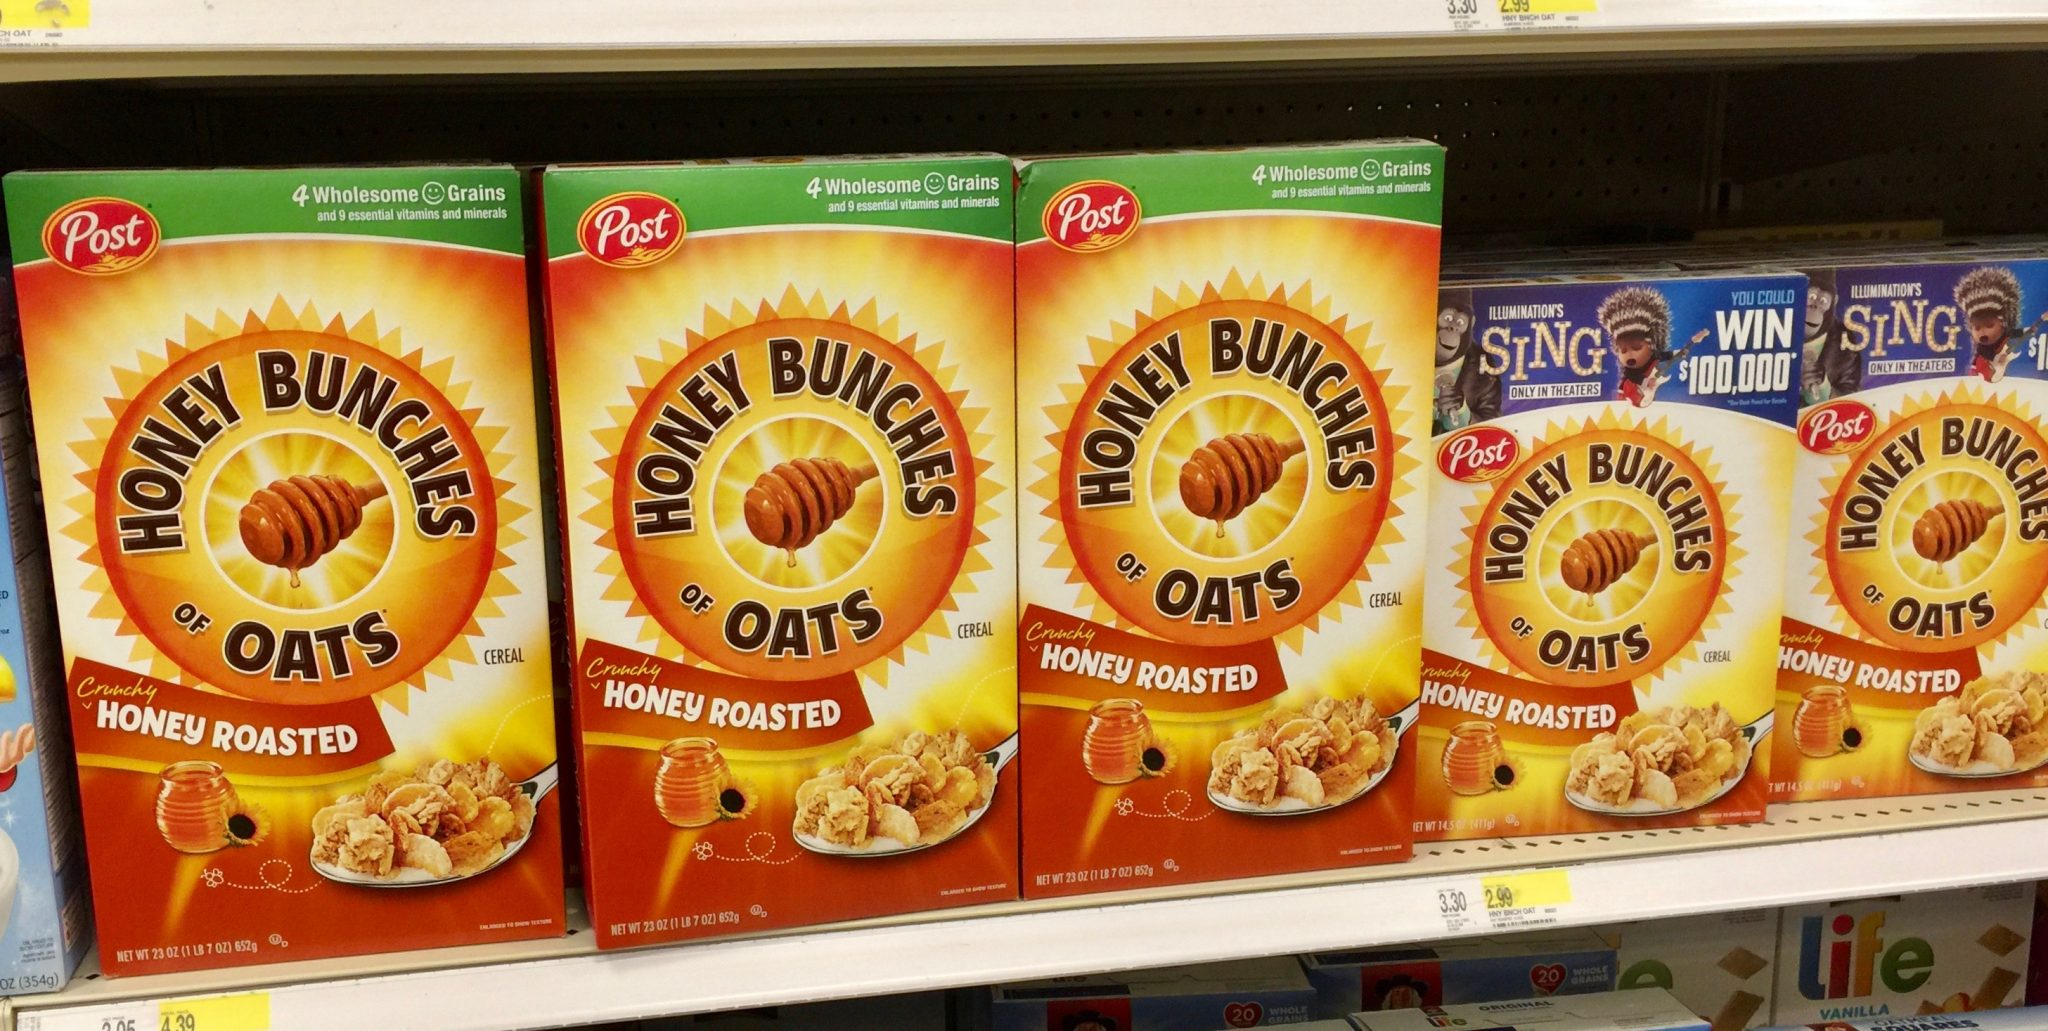 Honey Bunches of Oats Cereal Box at Target